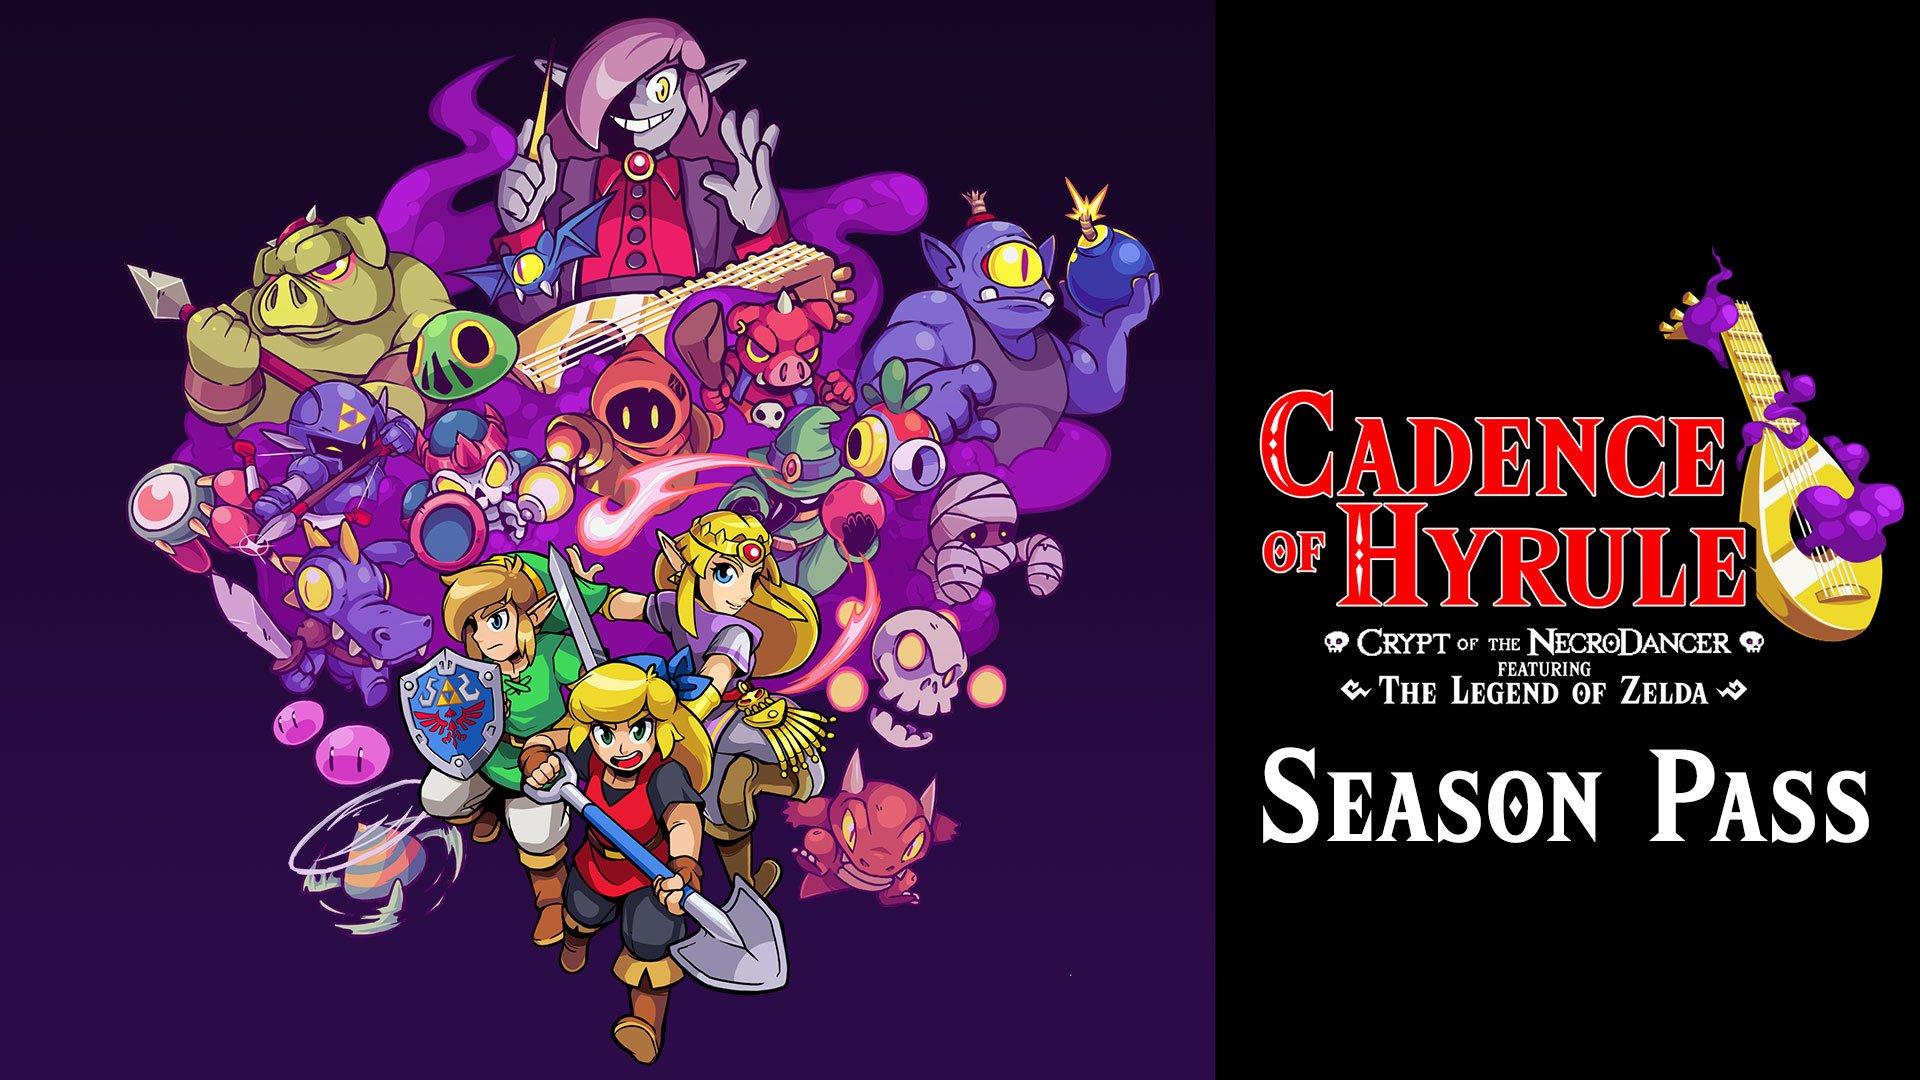 Cadence of Hyrule: Crypt of the NecroDancer Featuring The Legend of Zelda Season Pass - Nintendo Switch